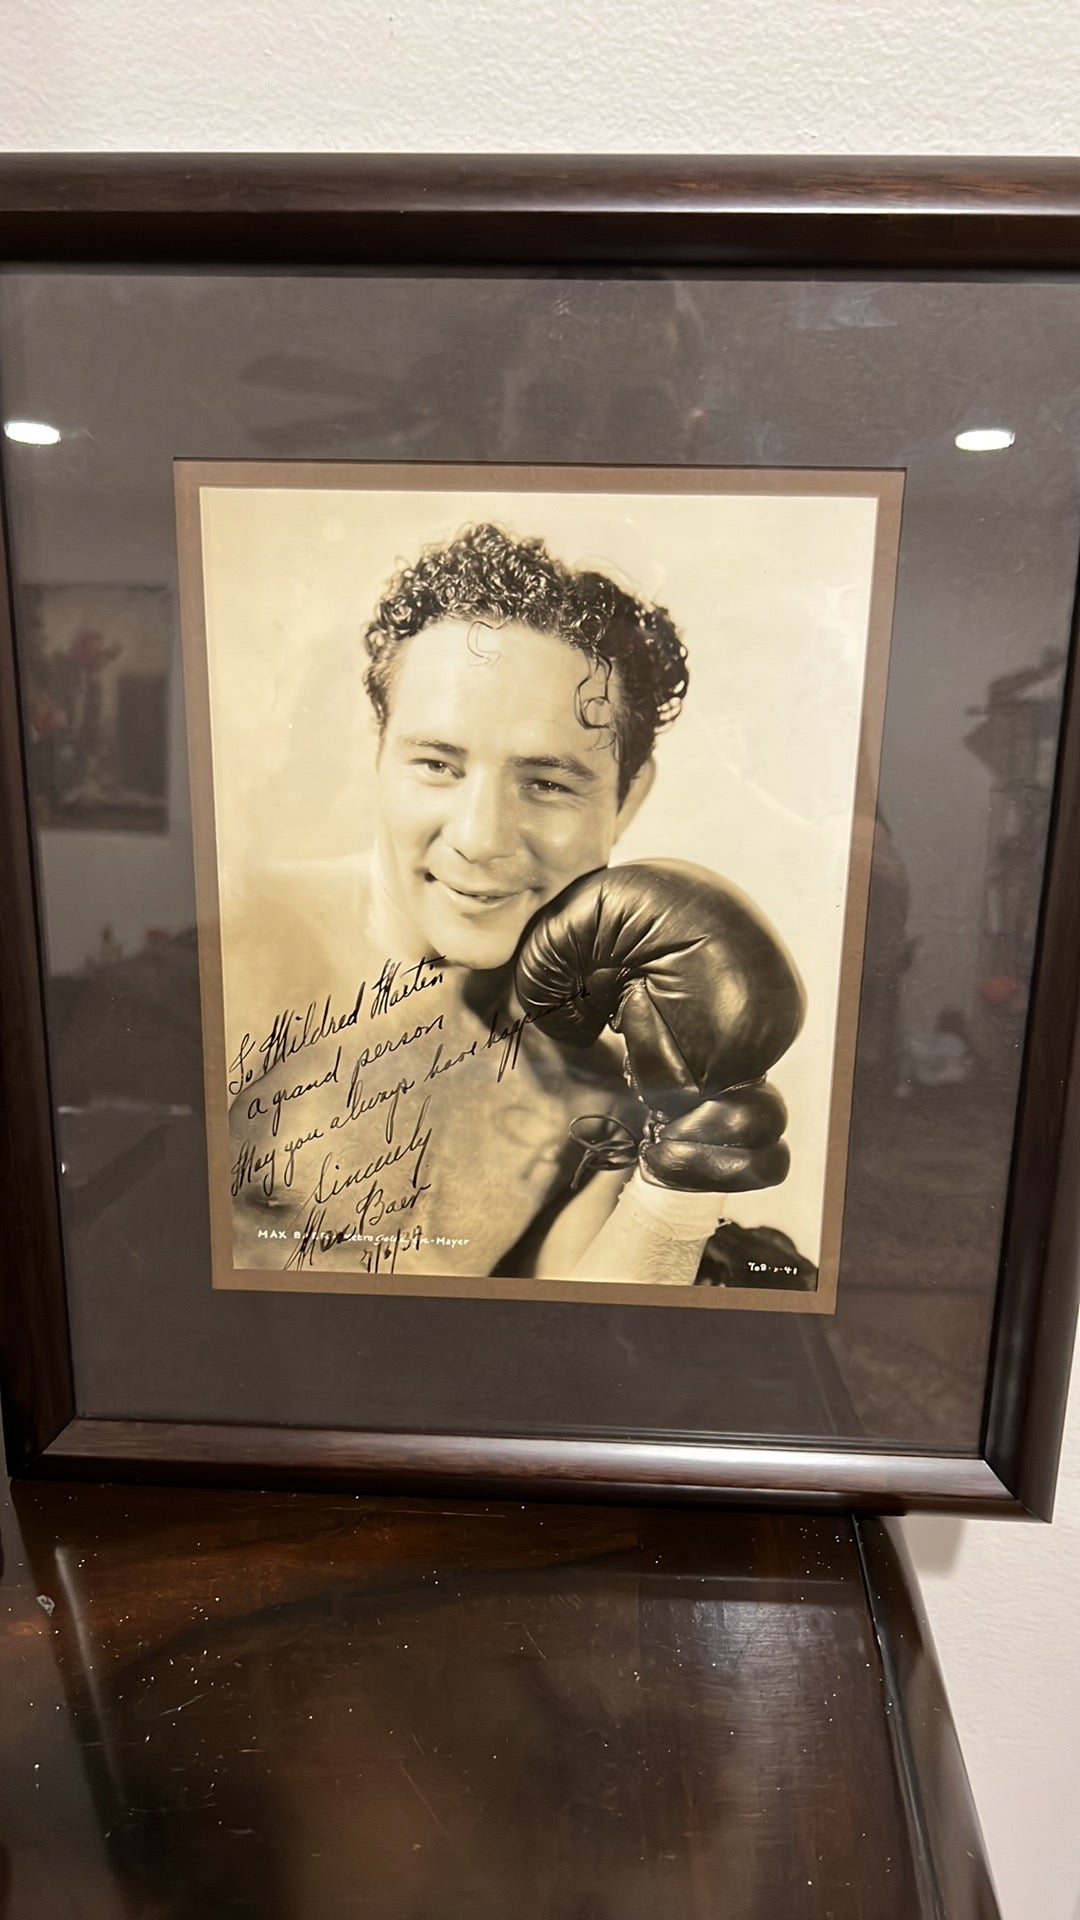 Max Baer hand signed photo 7x9 as champion